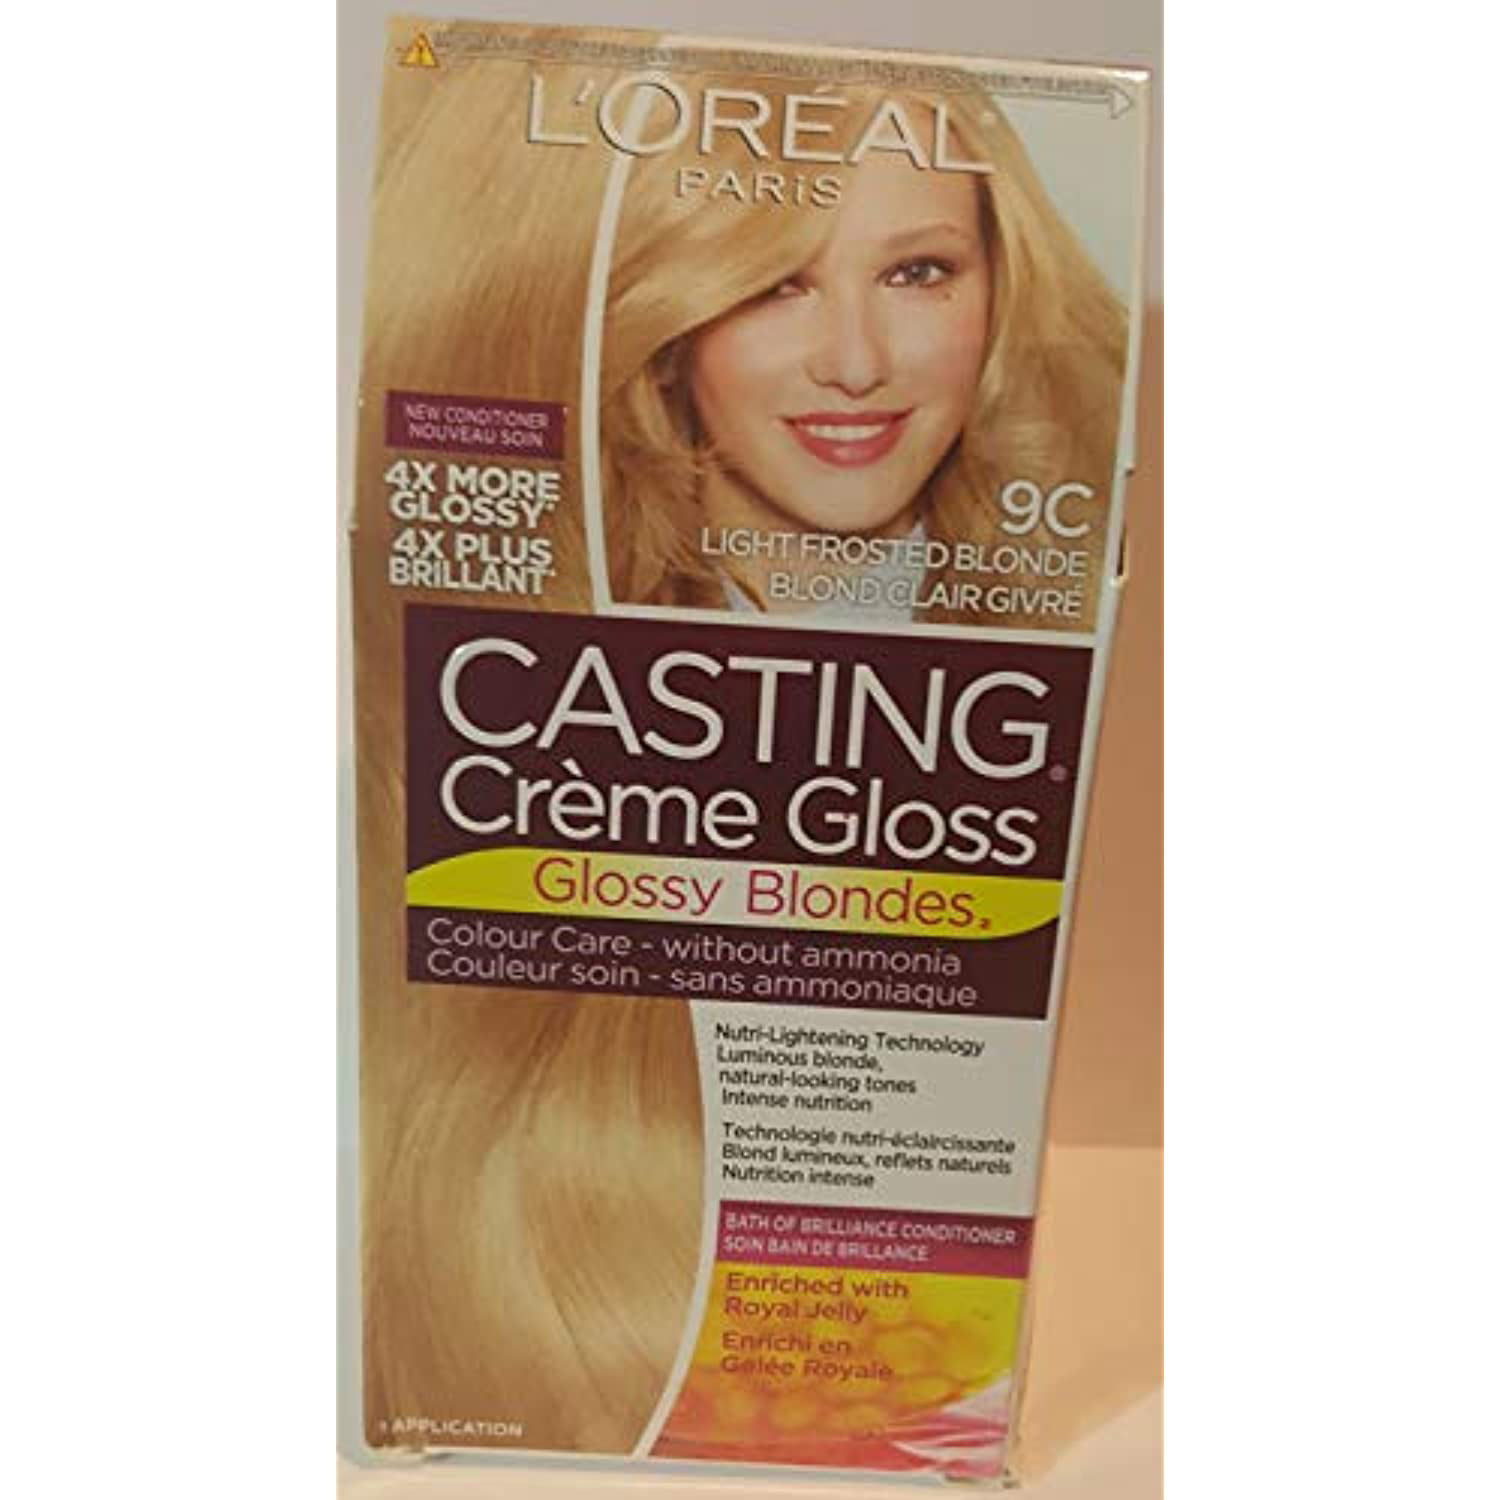 L'Oreal Paris Casting Creme Gloss, Glossy Blondes, 9C Light Frosted ...